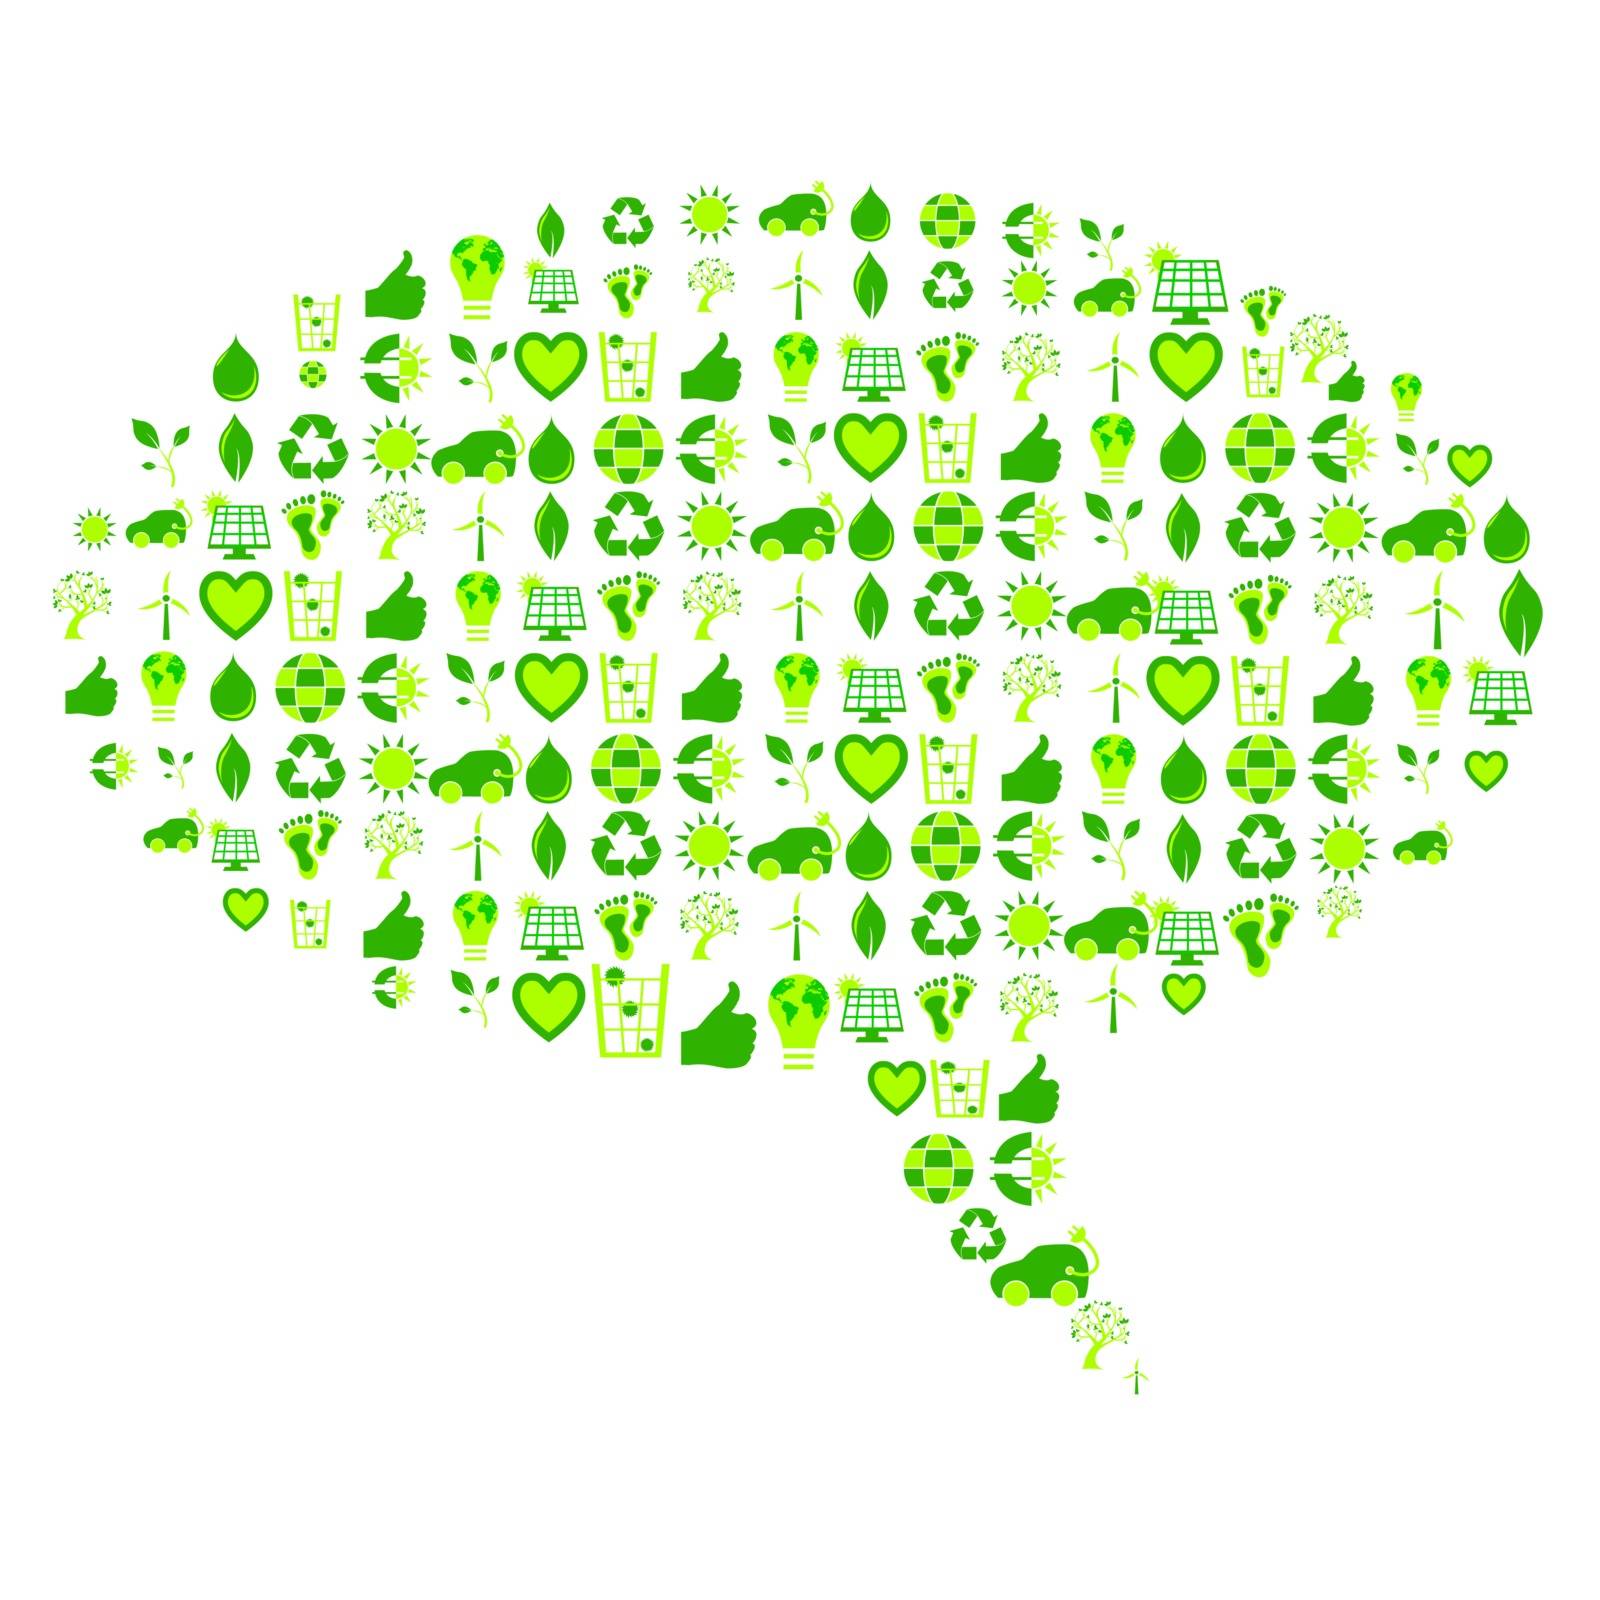 Speech bubble made of bio eco environmental related icons and symbols in four shades of green